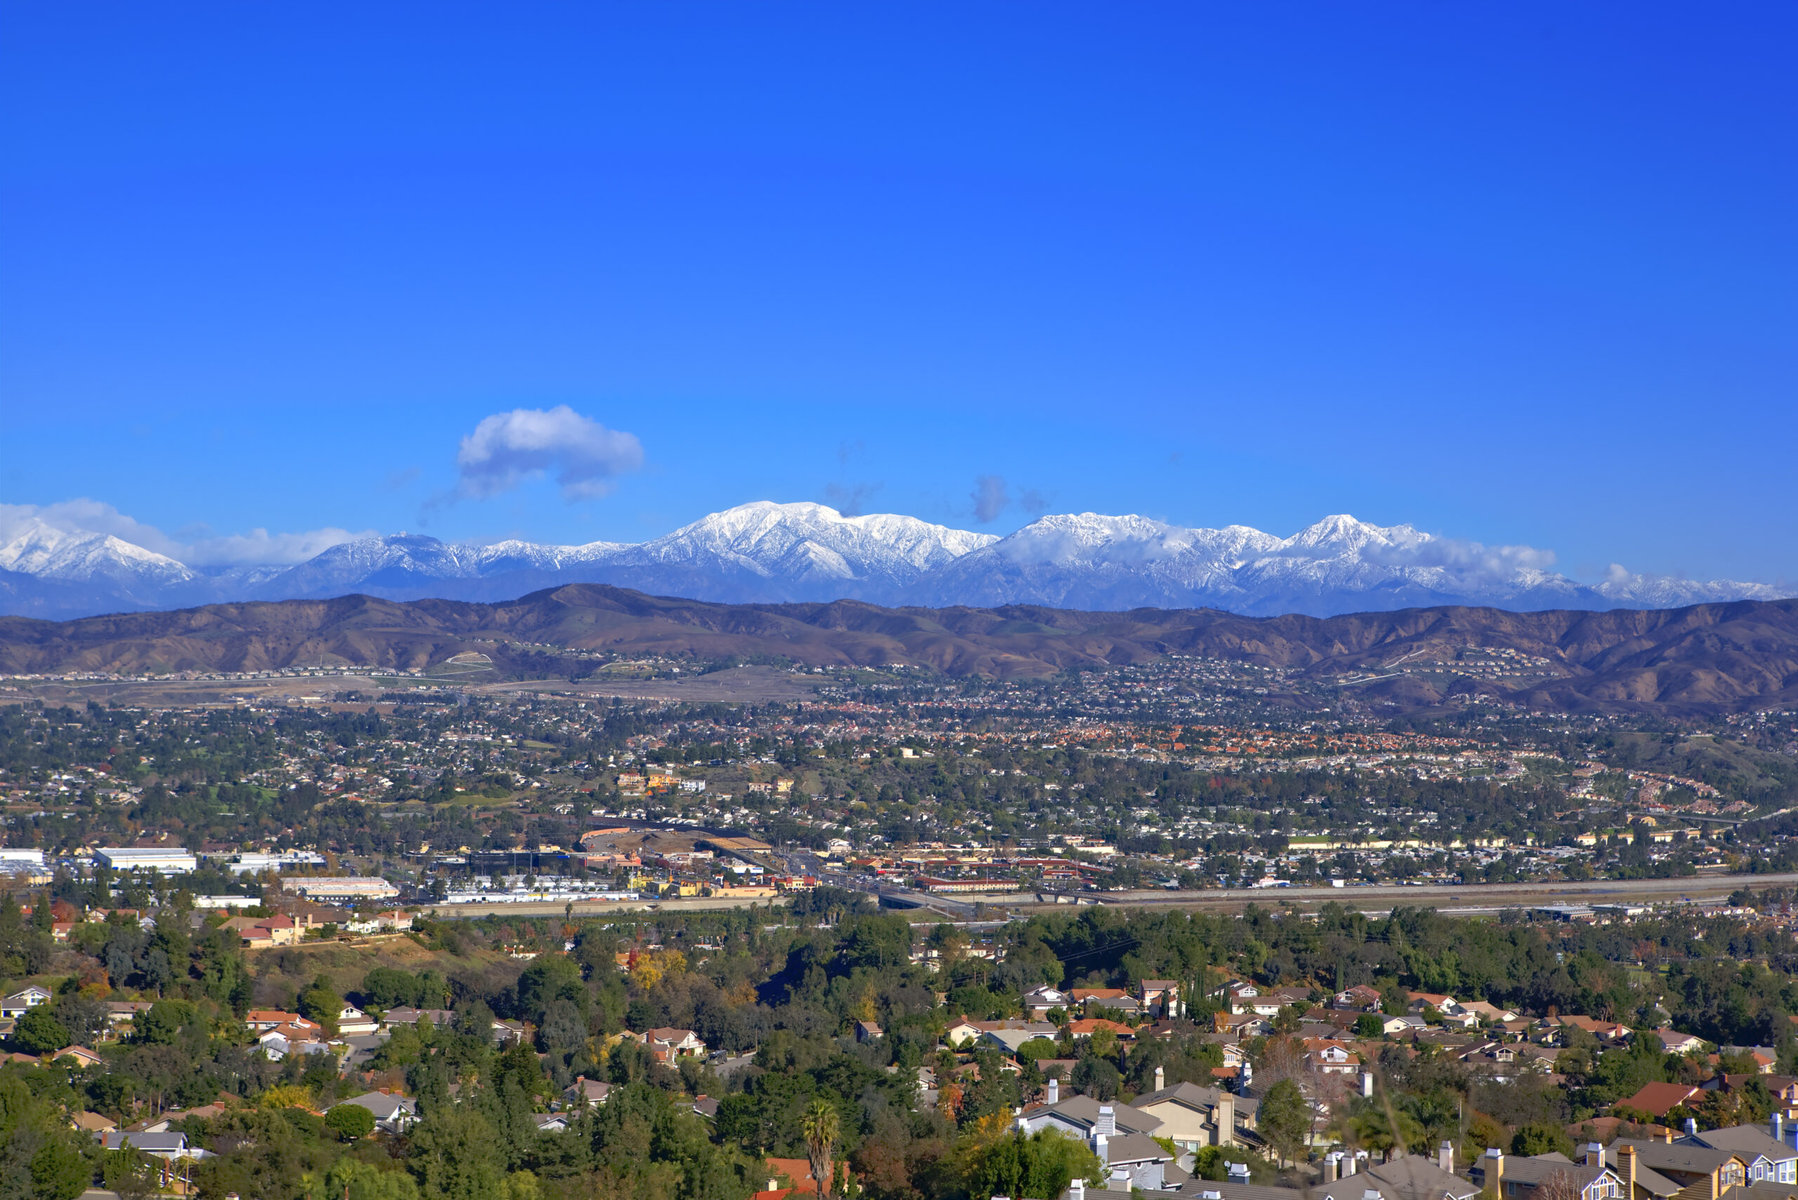 A view of Los Angeles with snowy mountains in the background.